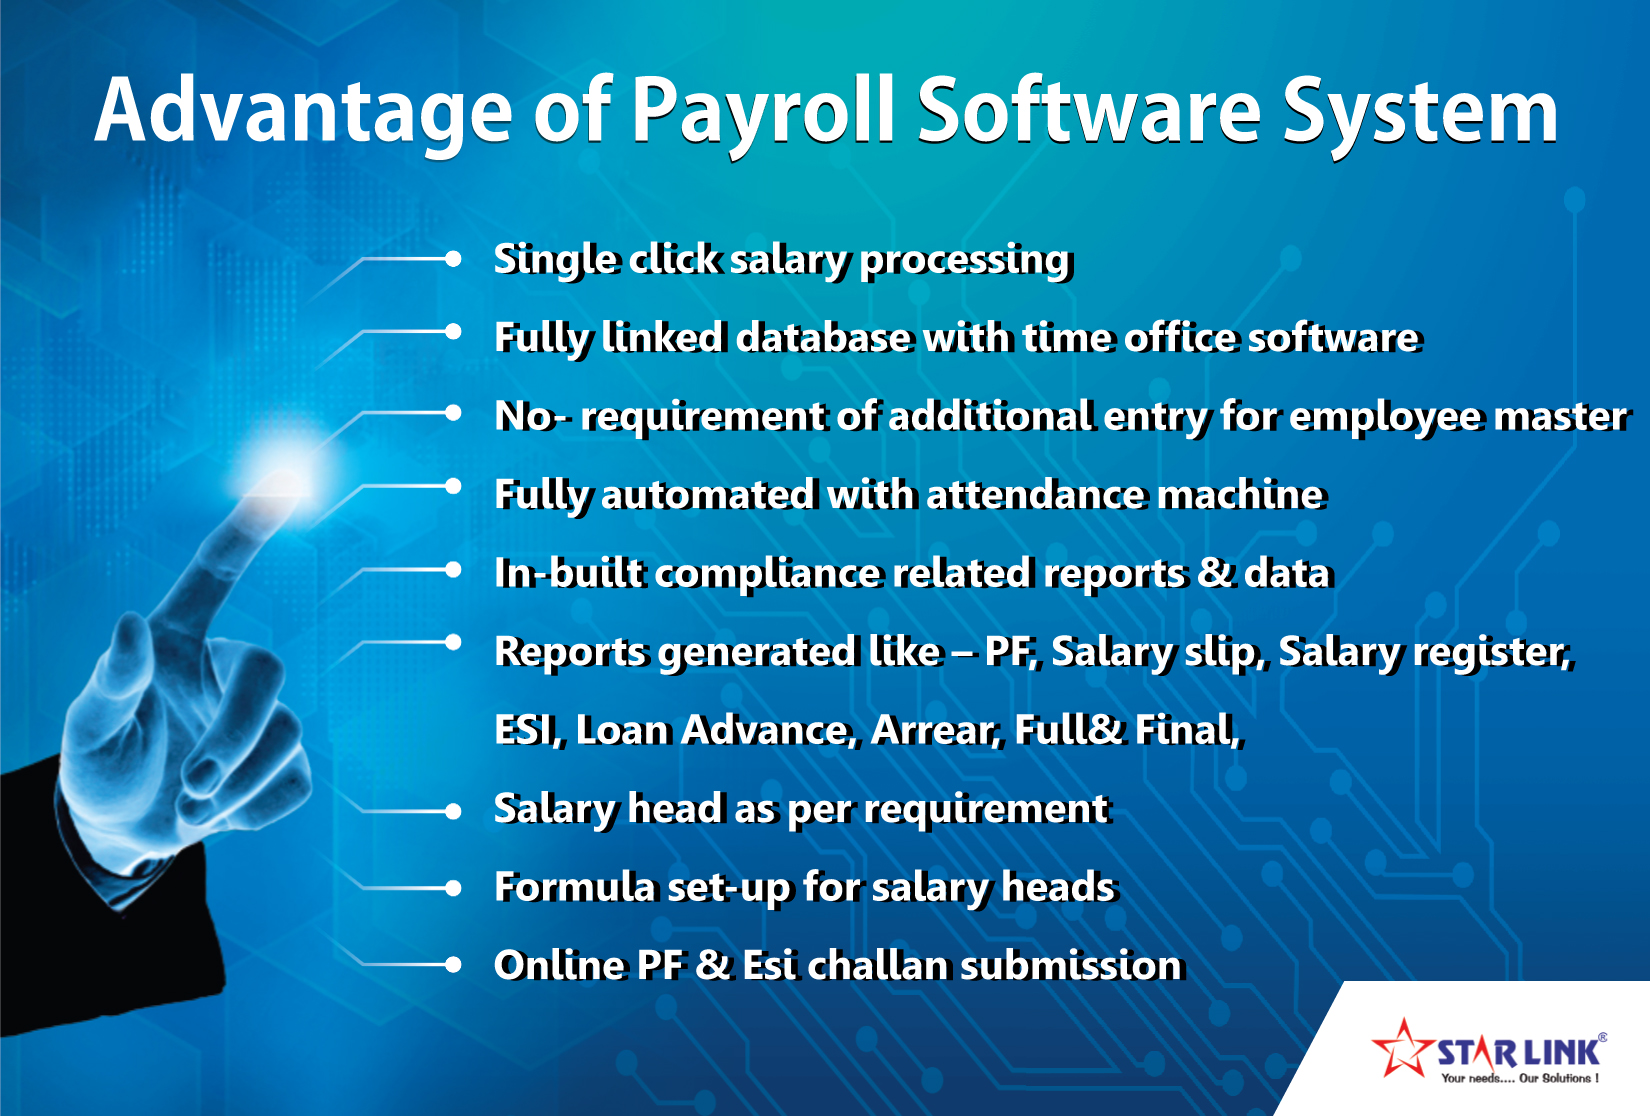 Payroll Software System from Star Link India